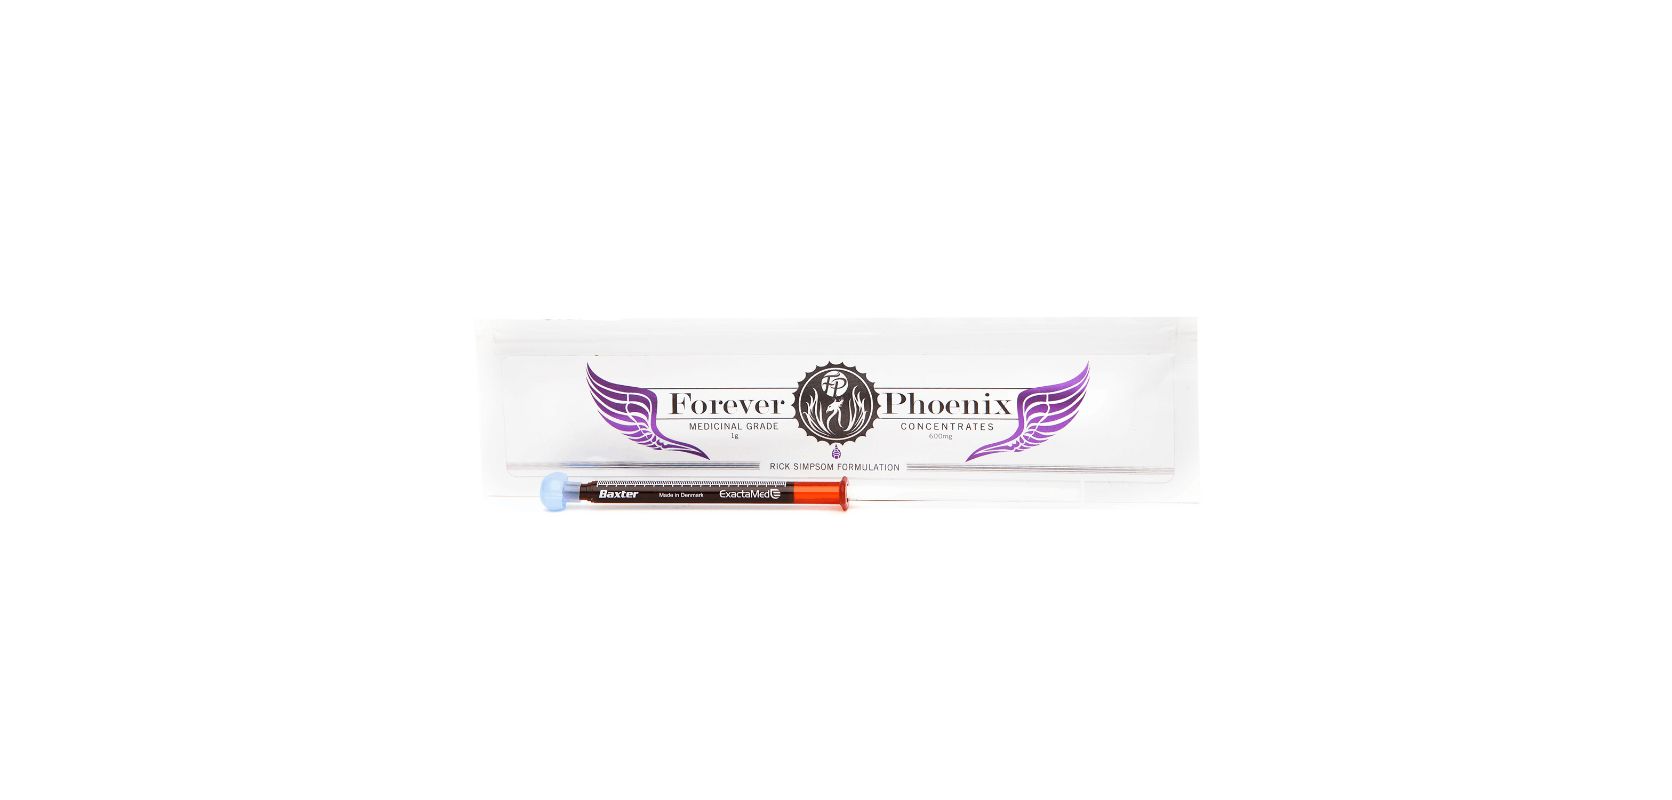 The Forever Phoenix 600mg THC Phoenix Tears – Original Formulation is for consumers who prefer to stick to the basics. 